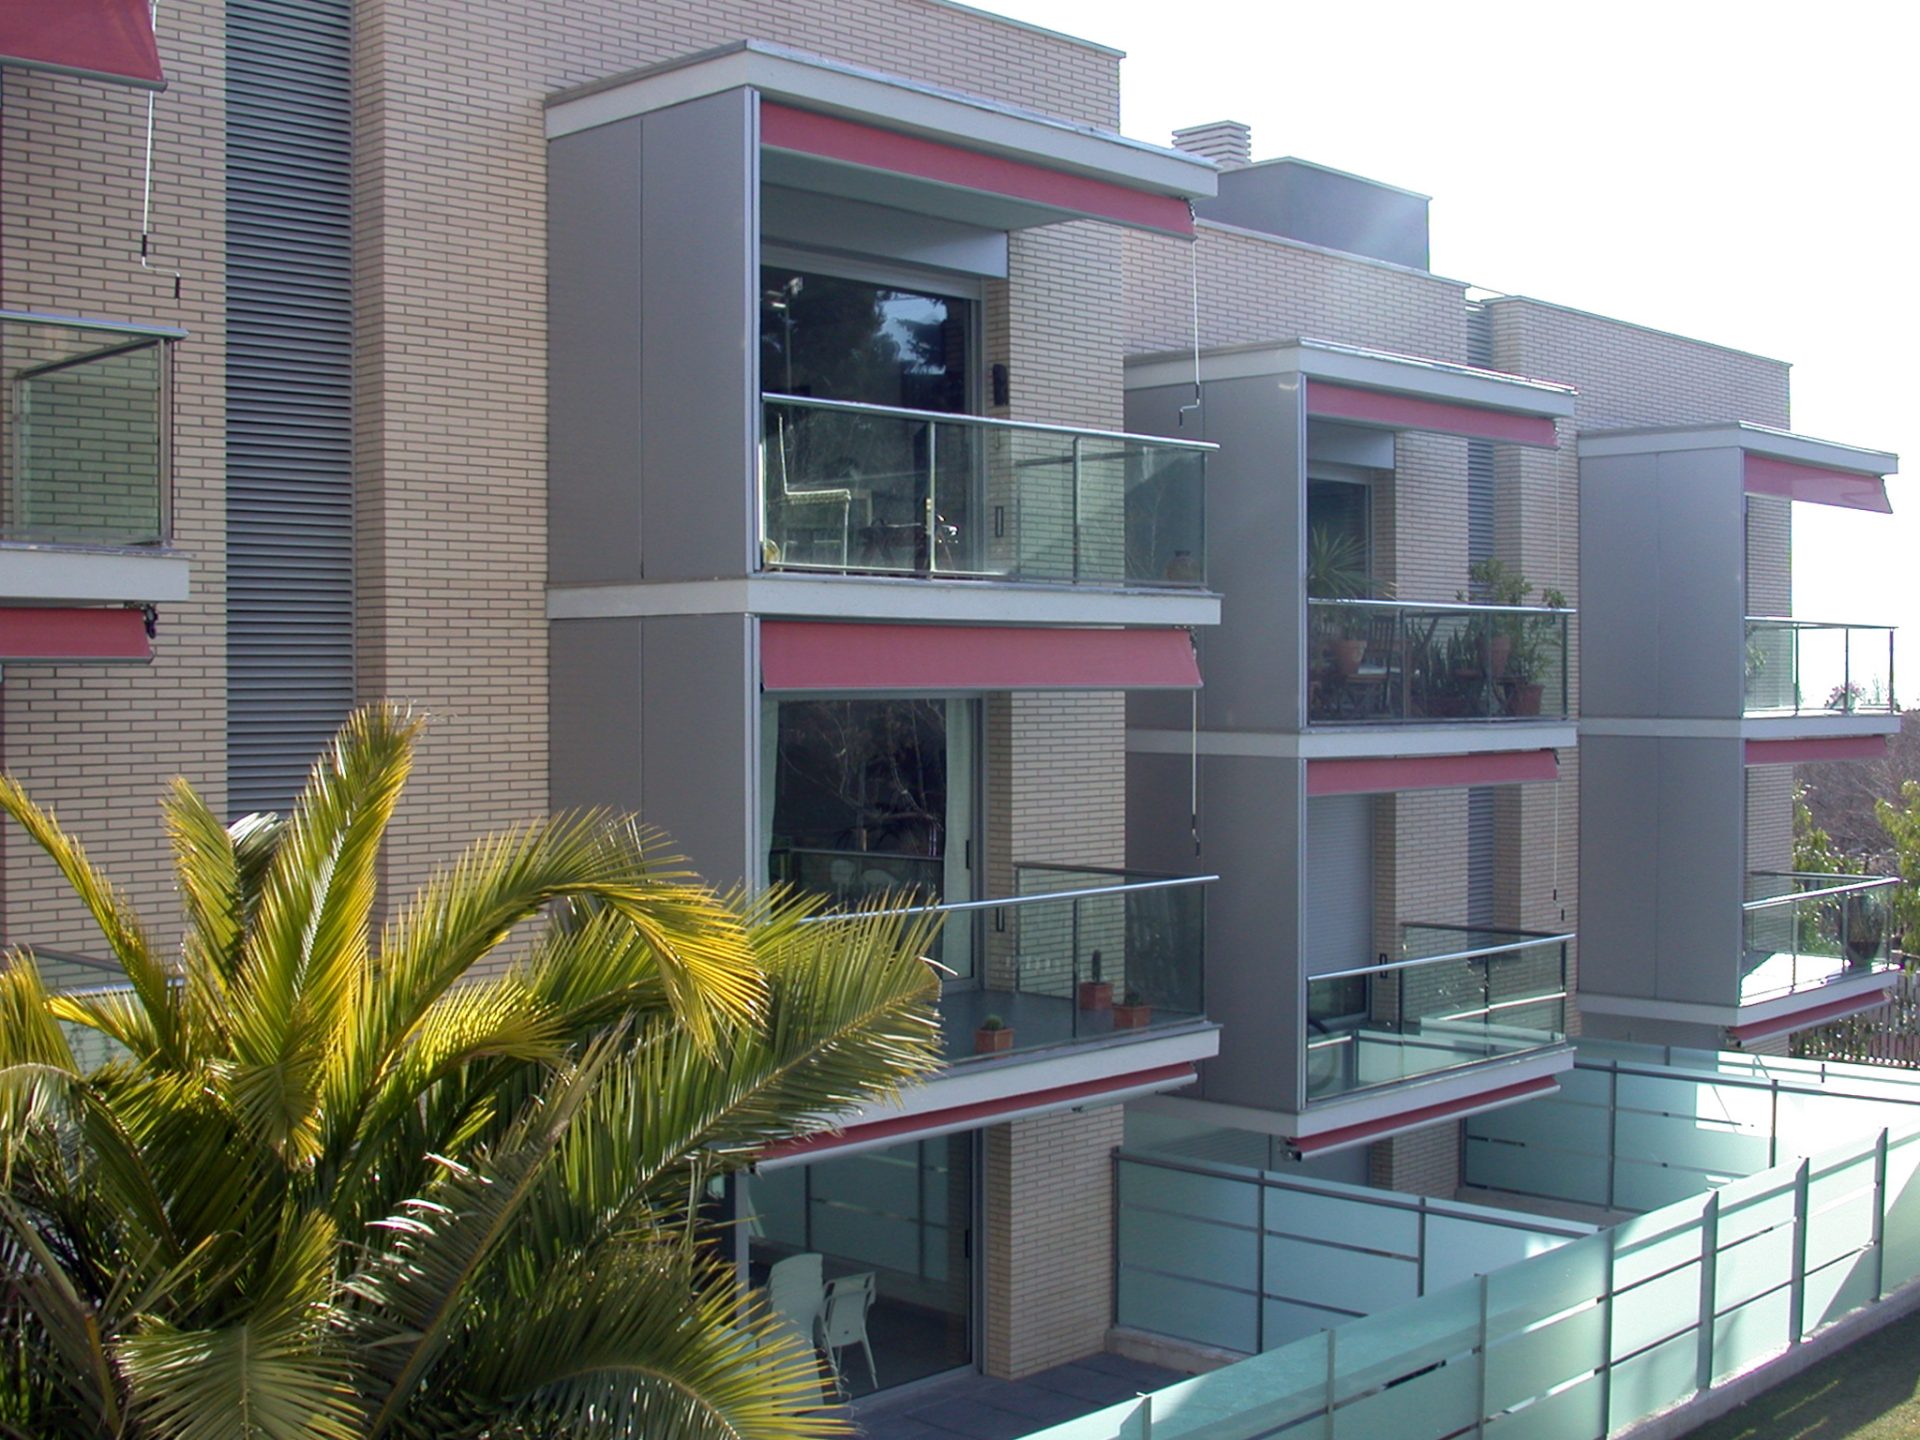 Balconies with glass and metal railings